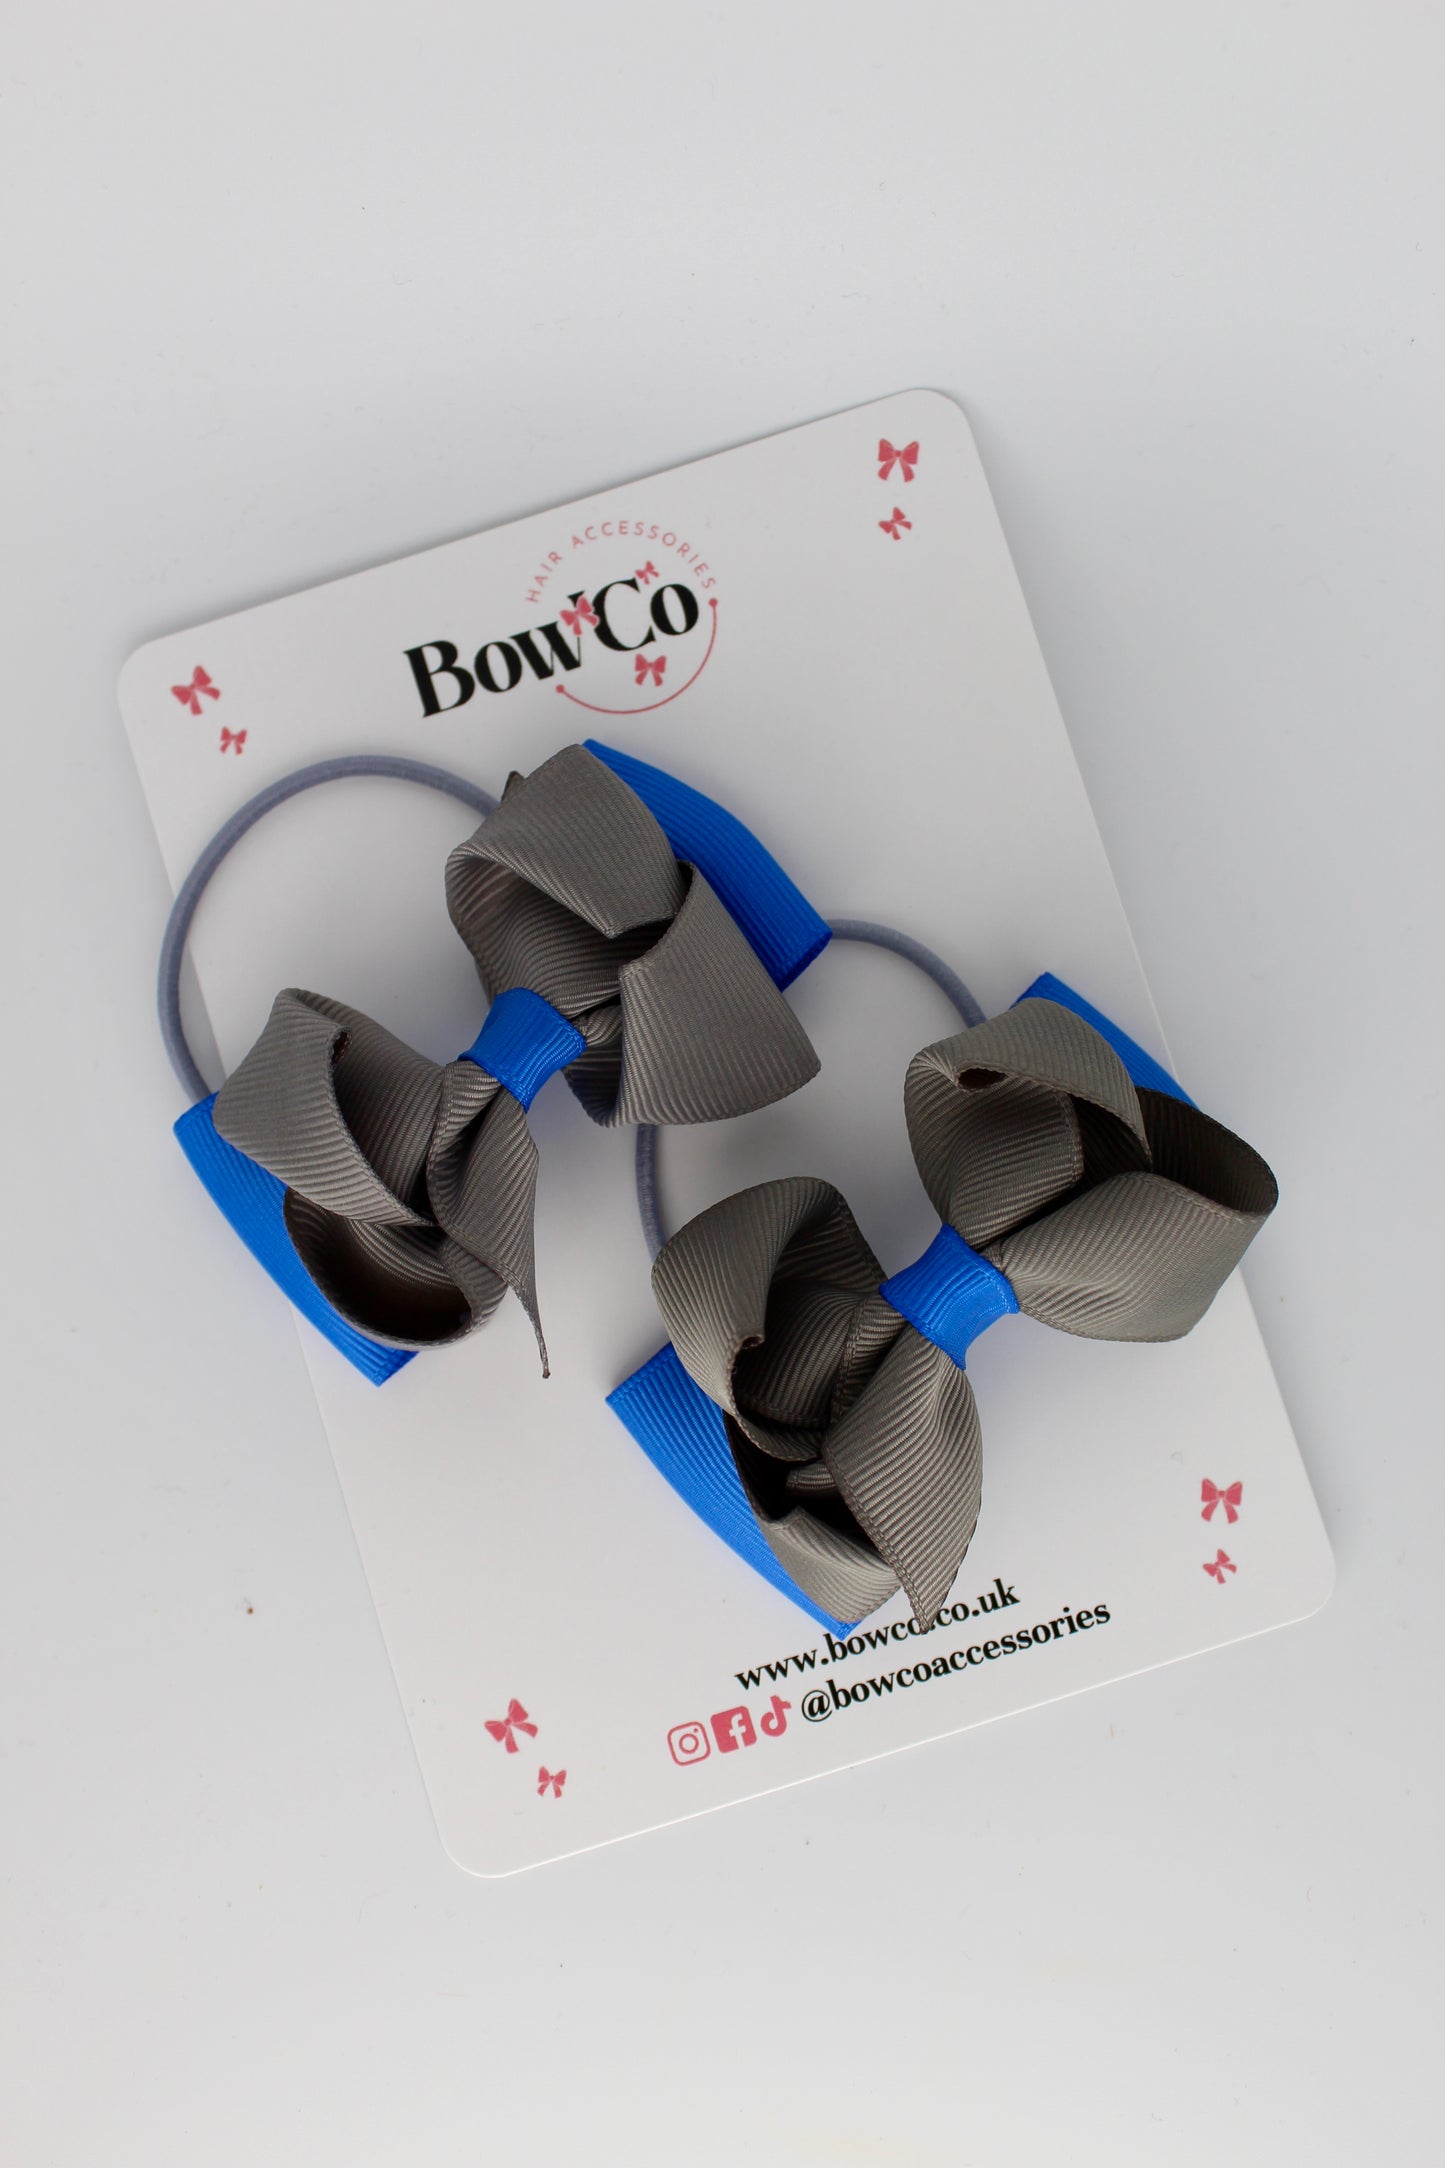 3 Inch Ruffle Bow - Elastic - 2 Pack - Royal Blue and Metal Grey